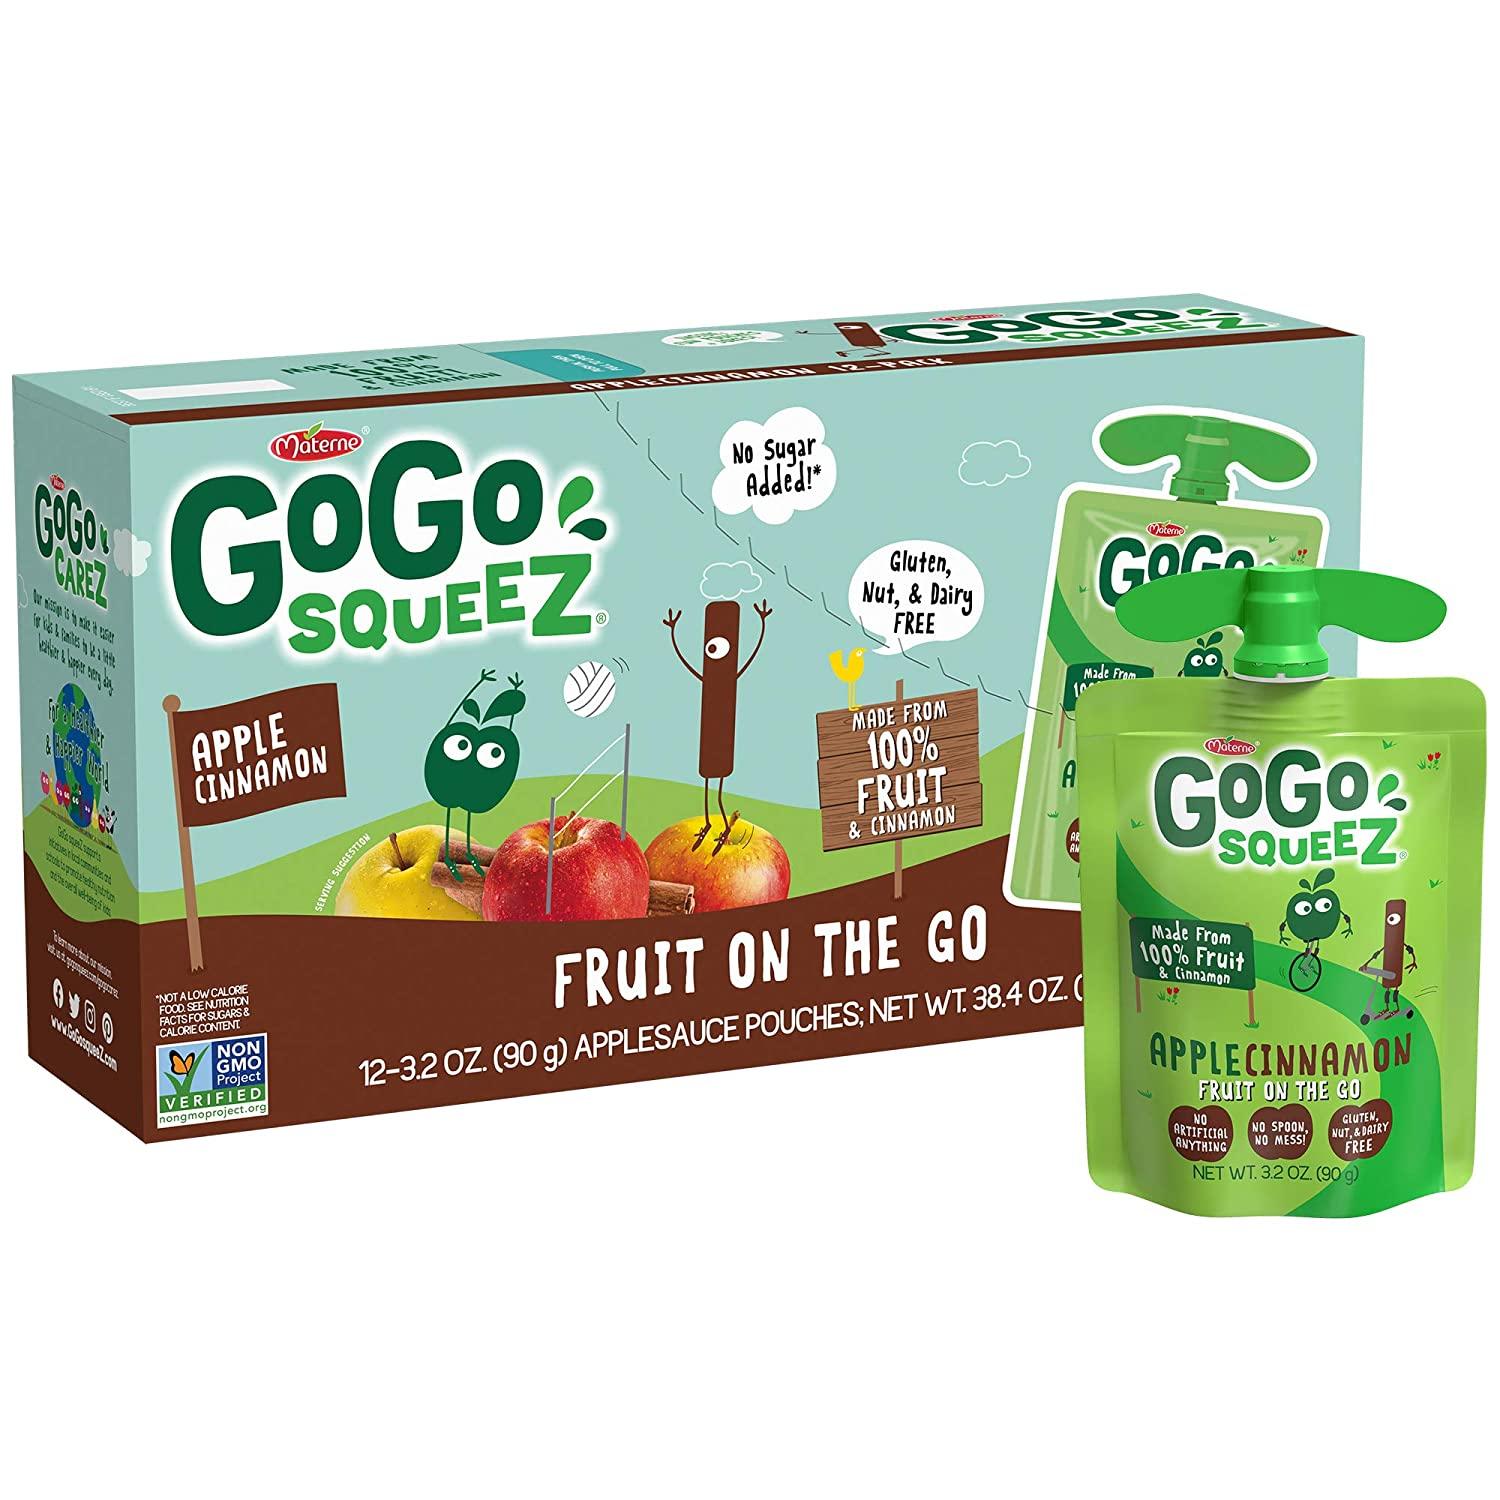 12 GoGo squeeZ Applesauce on the Go for $5.69 Shipped